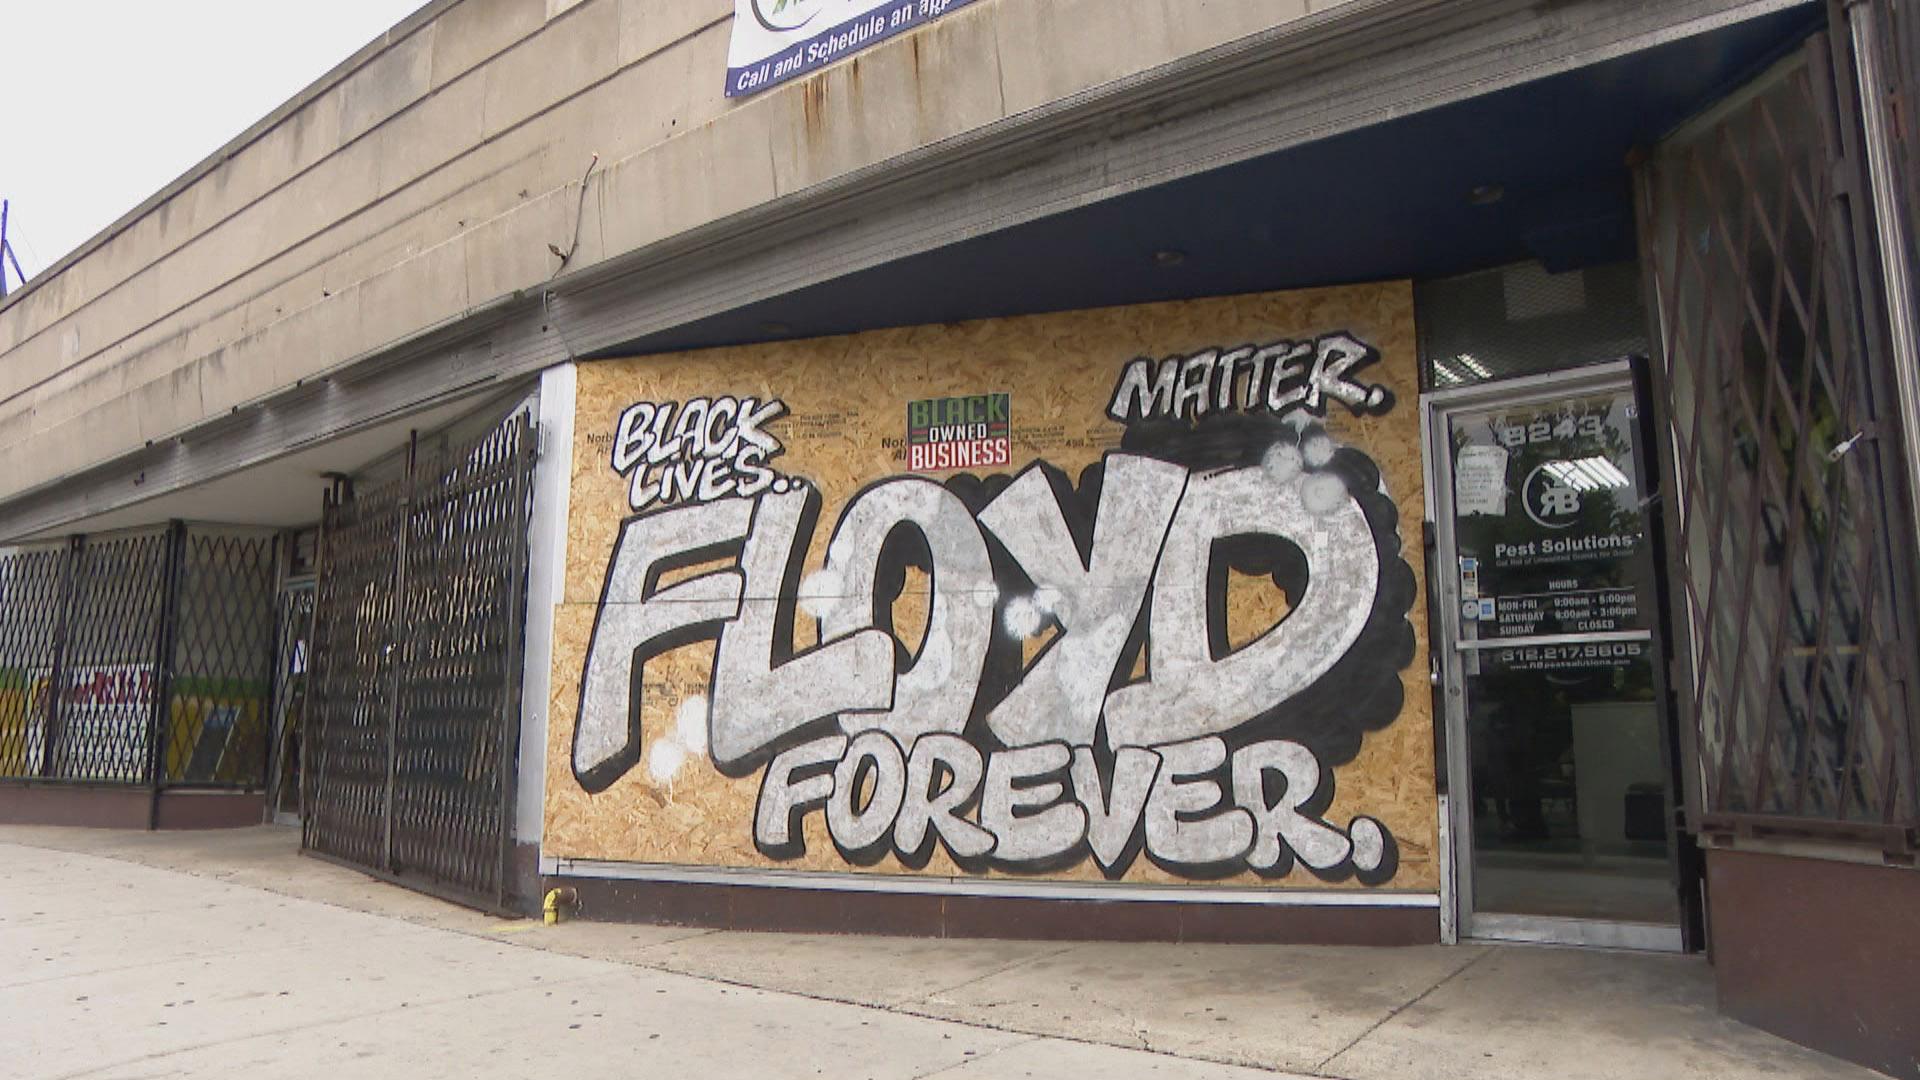 A mural in Chicago featured in the new book “Boarded Up Chicago: Storefront Images Days After the George Floyd Riots.” (WTTW News)